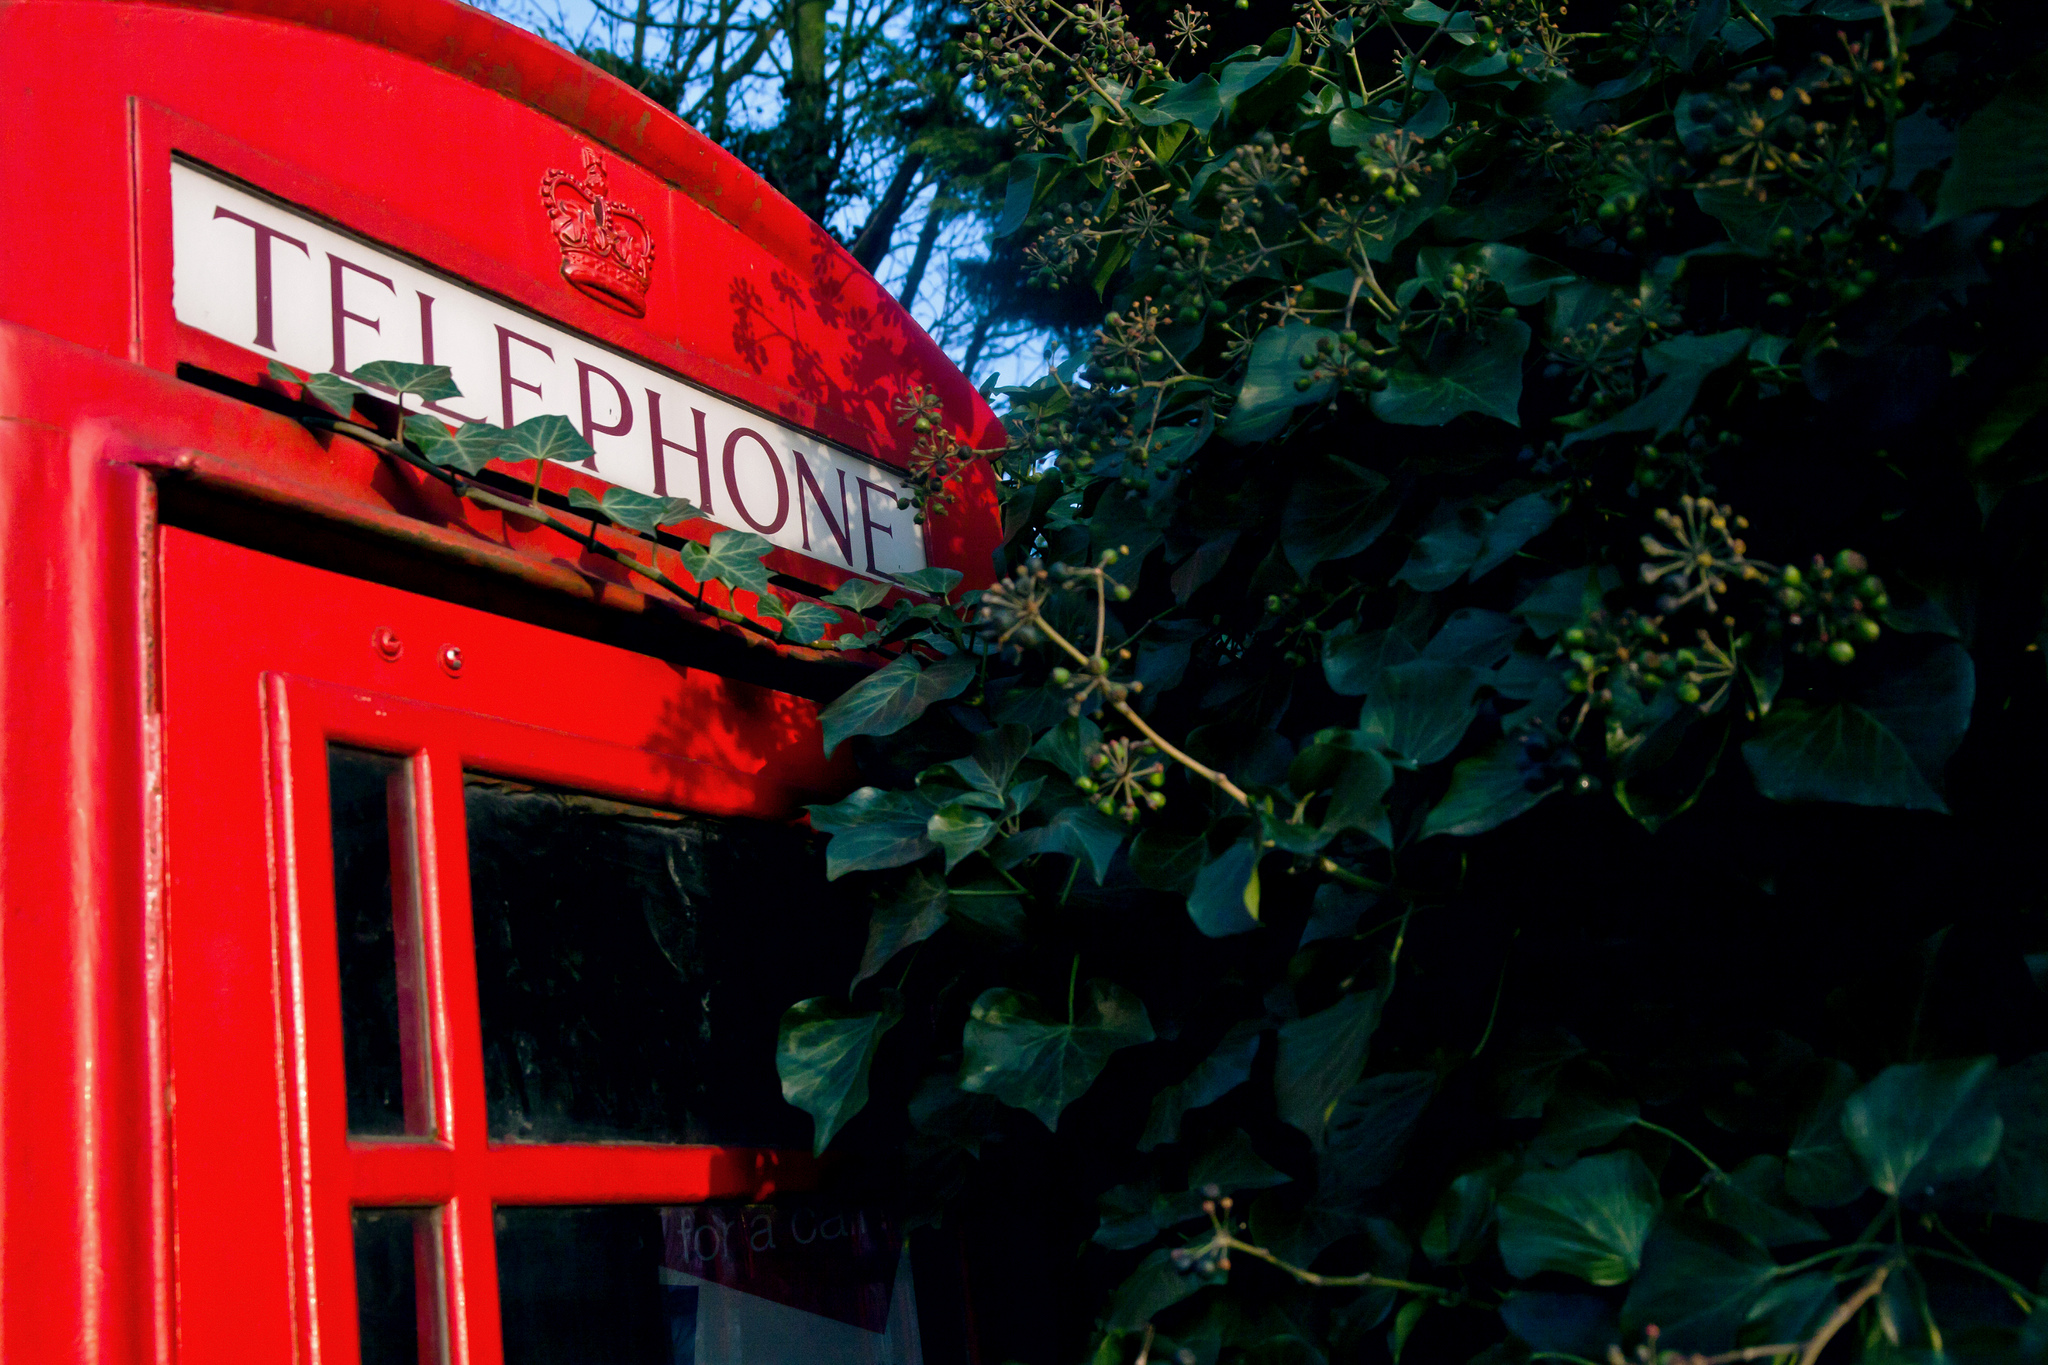 London red phone booth - Pawel Pacholec 